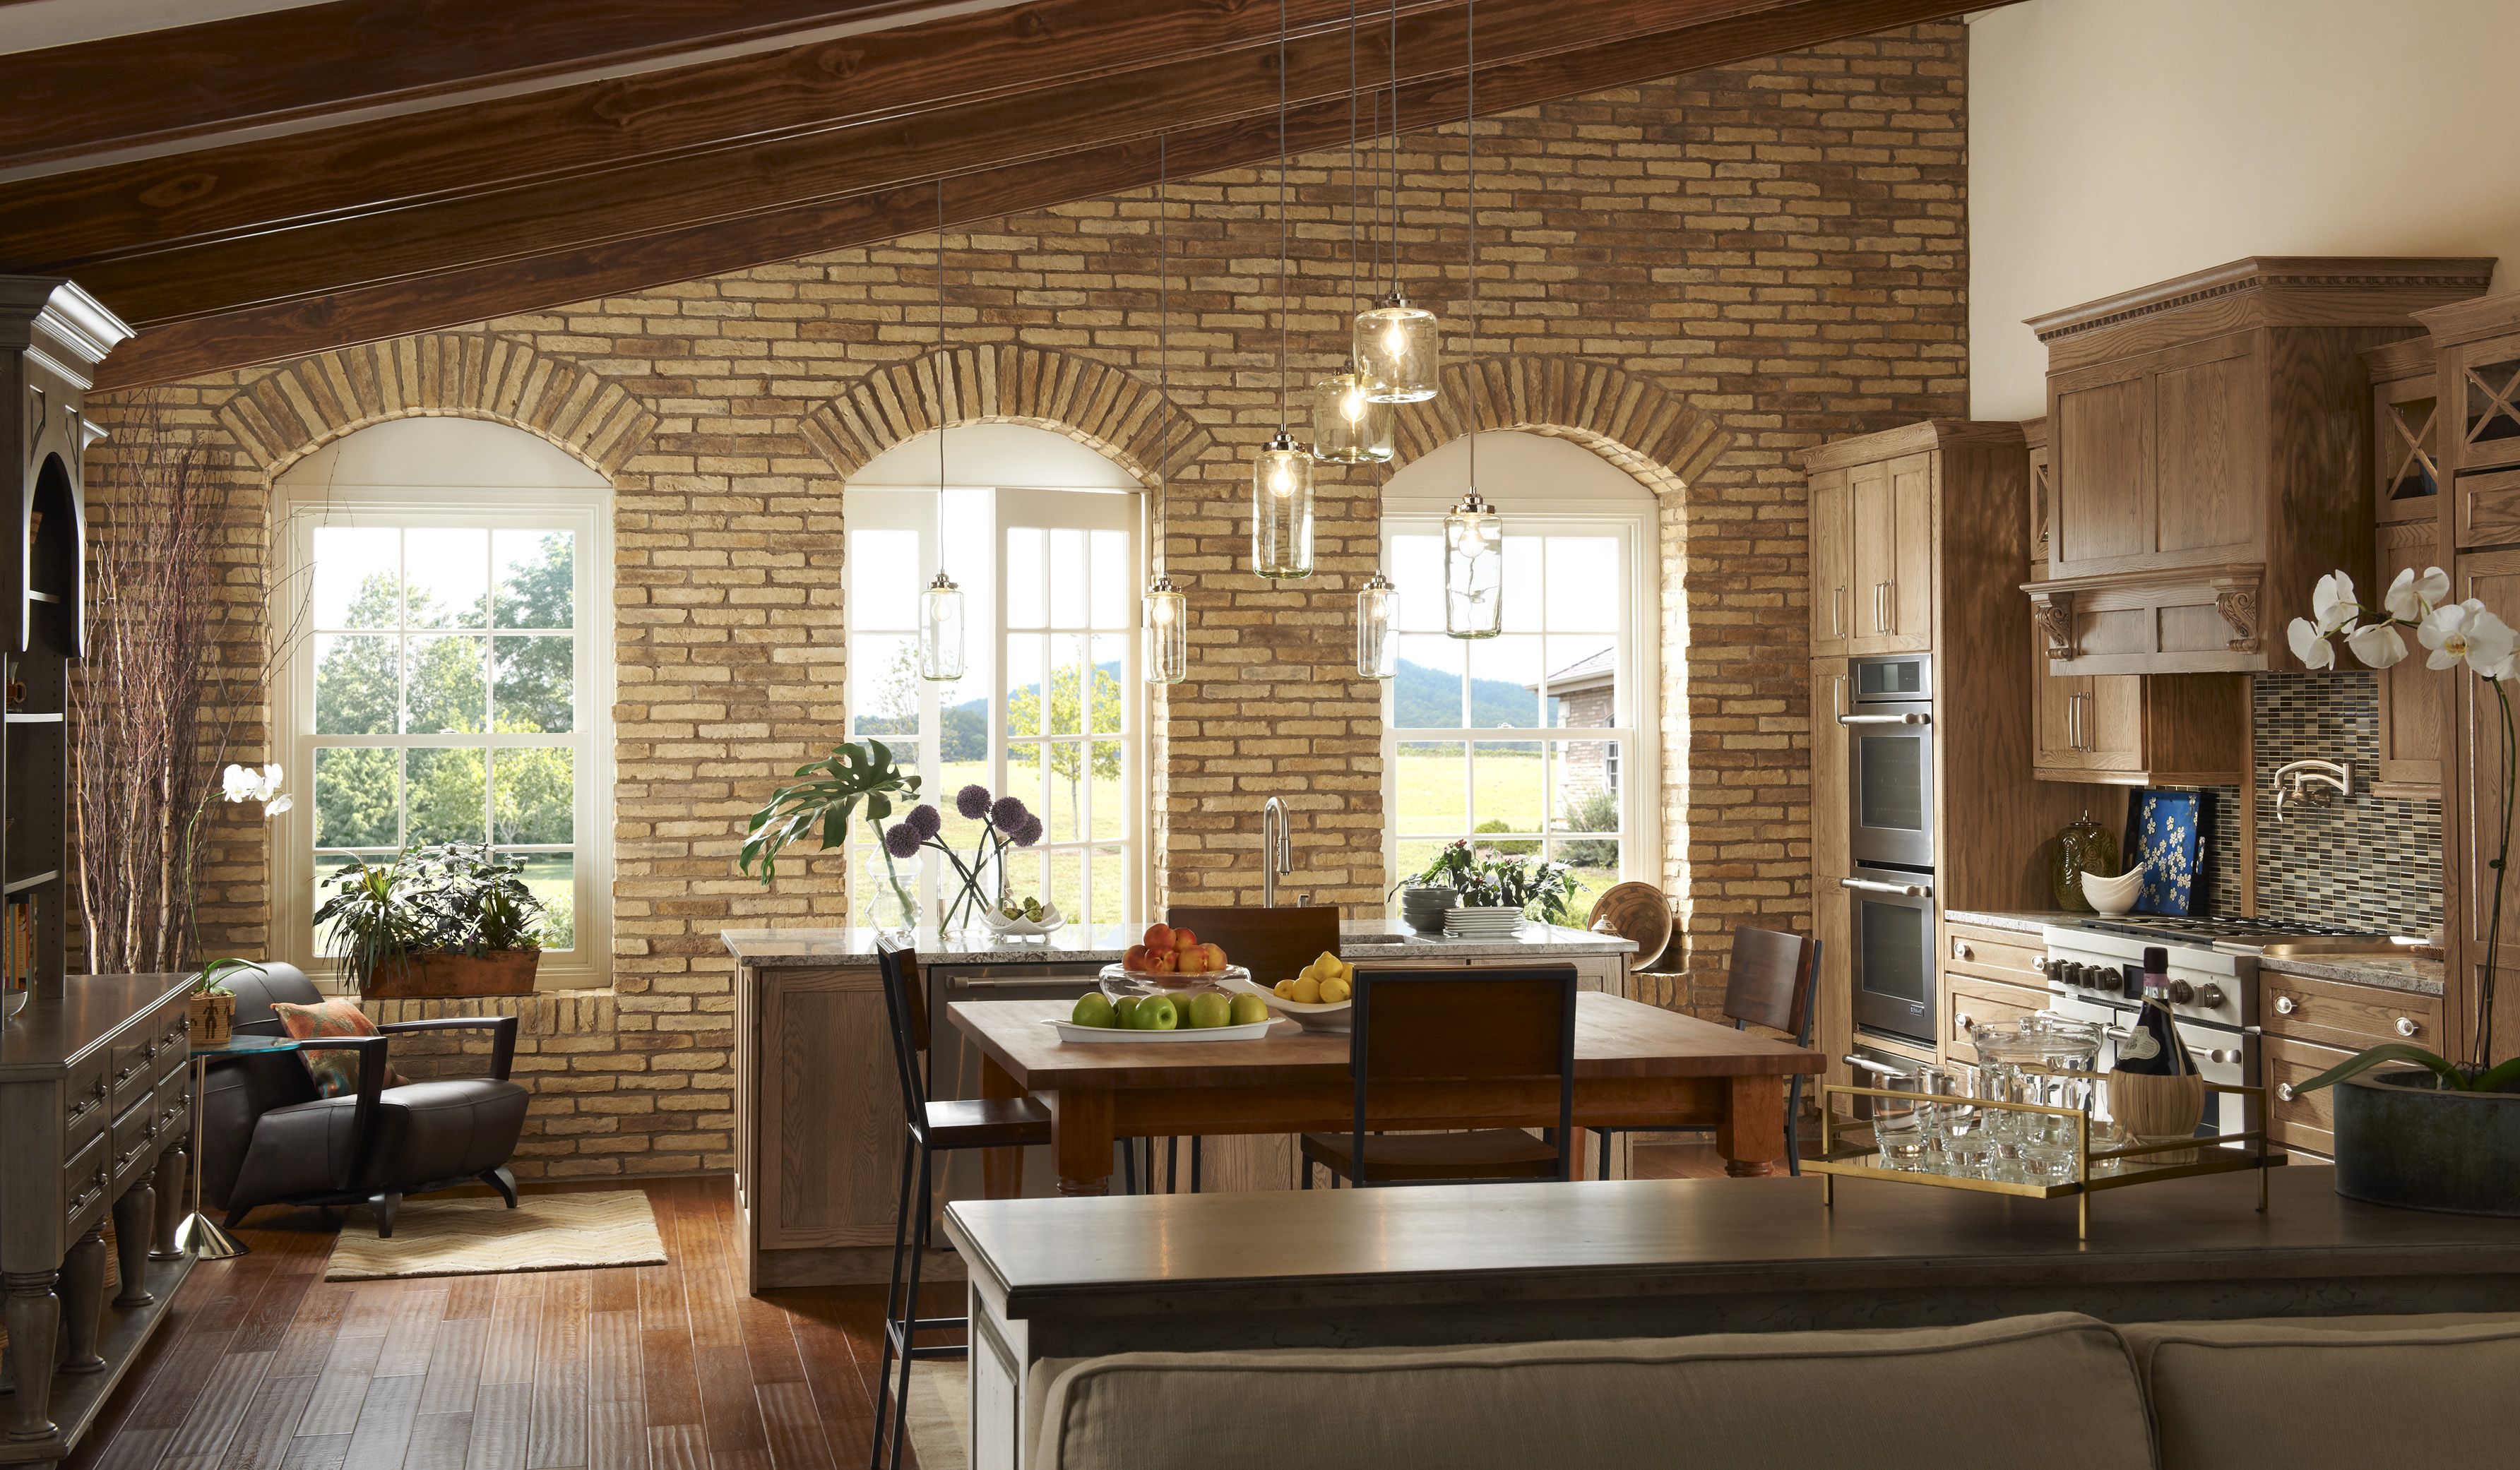 Brick Stone And Beyond: Exploring Material Options For Your Accent Wall